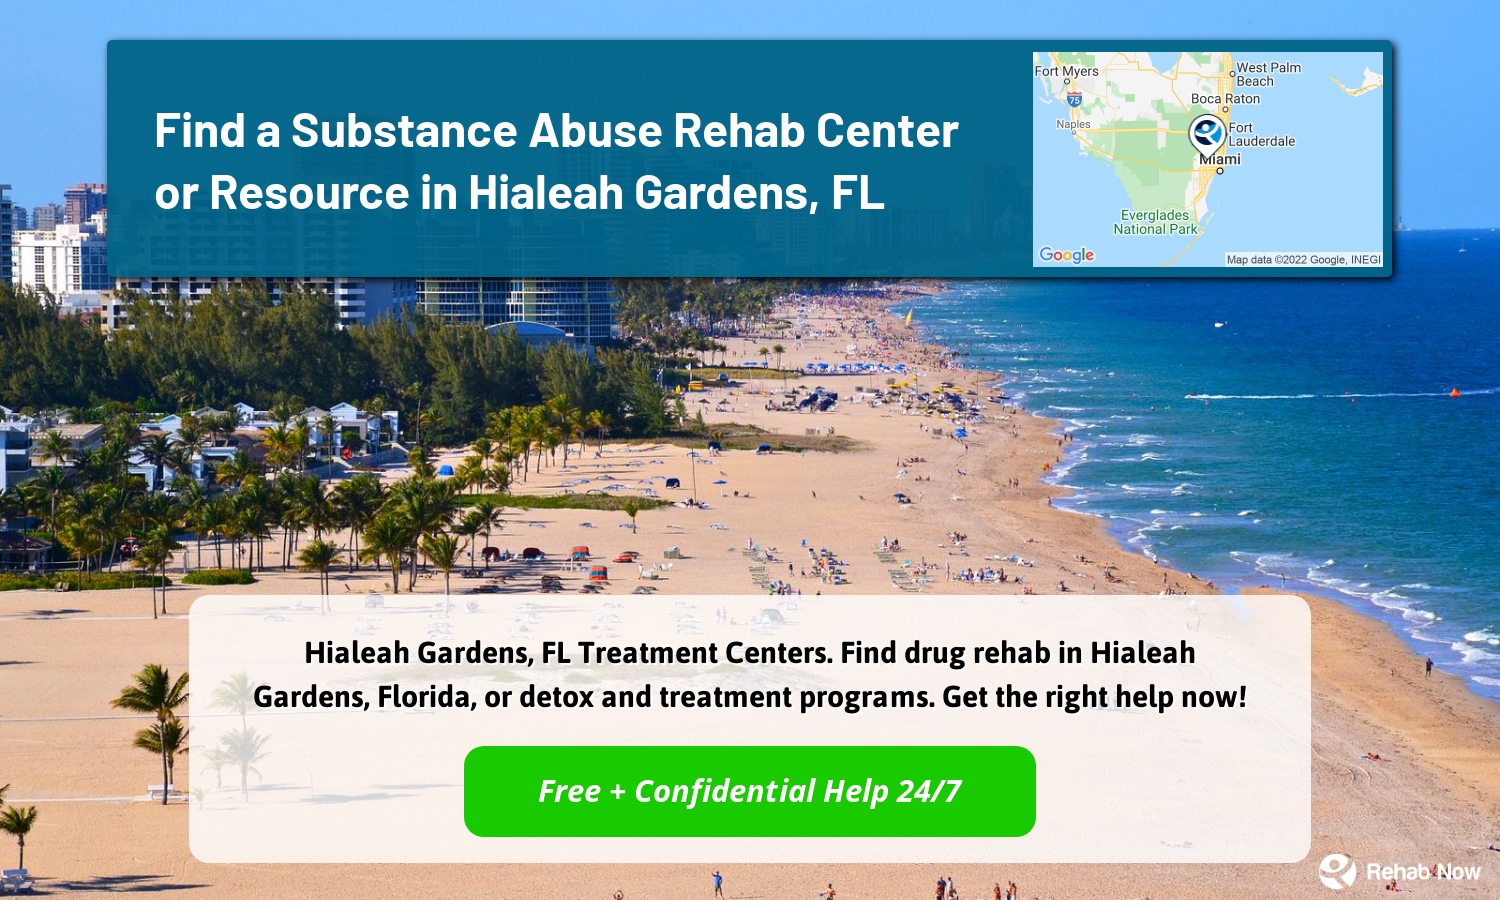 Hialeah Gardens, FL Treatment Centers. Find drug rehab in Hialeah Gardens, Florida, or detox and treatment programs. Get the right help now!